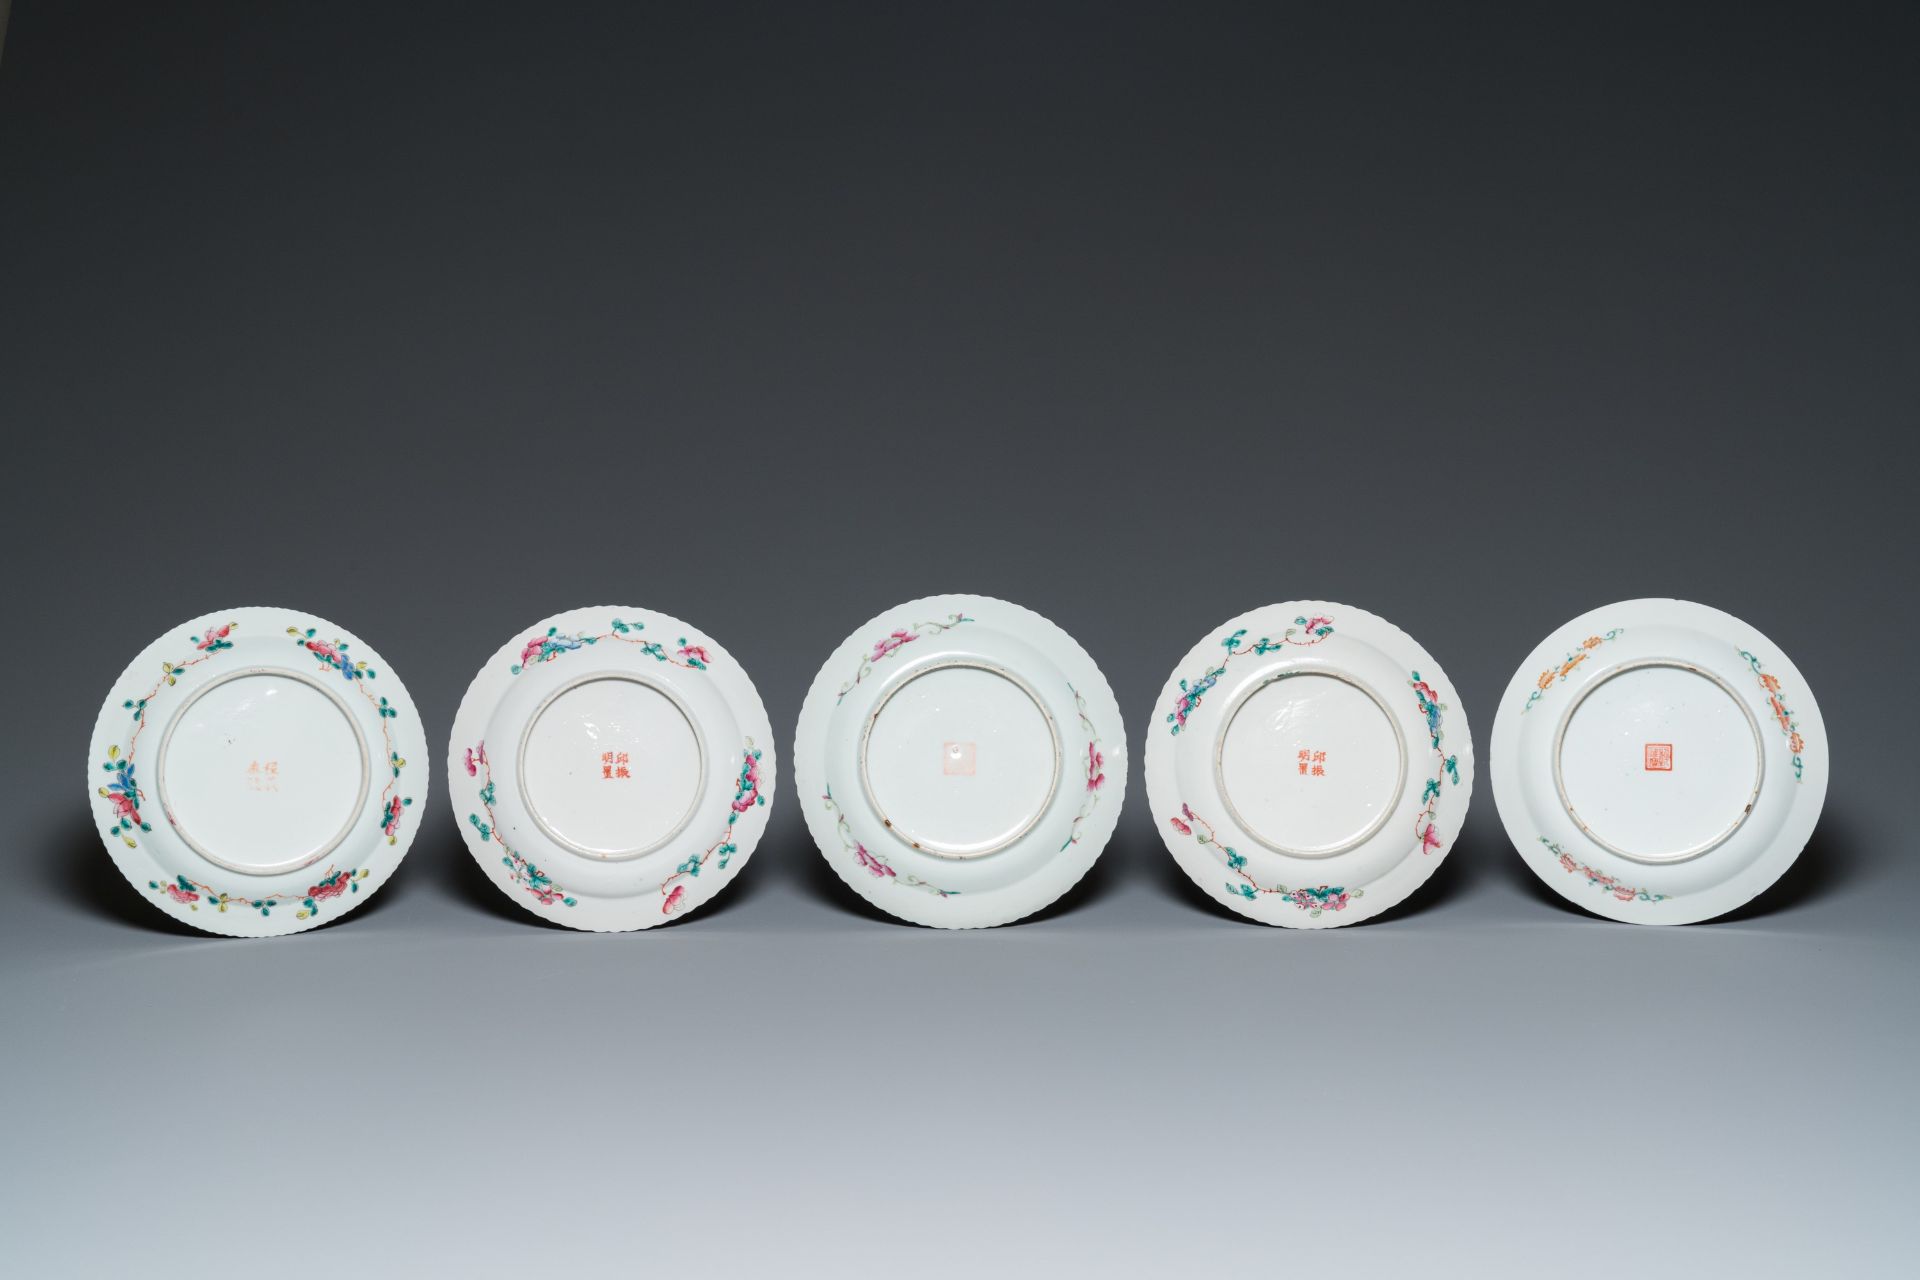 21 Chinese famille rose wares for the Straits or Peranakan market, 19th C. - Image 3 of 13